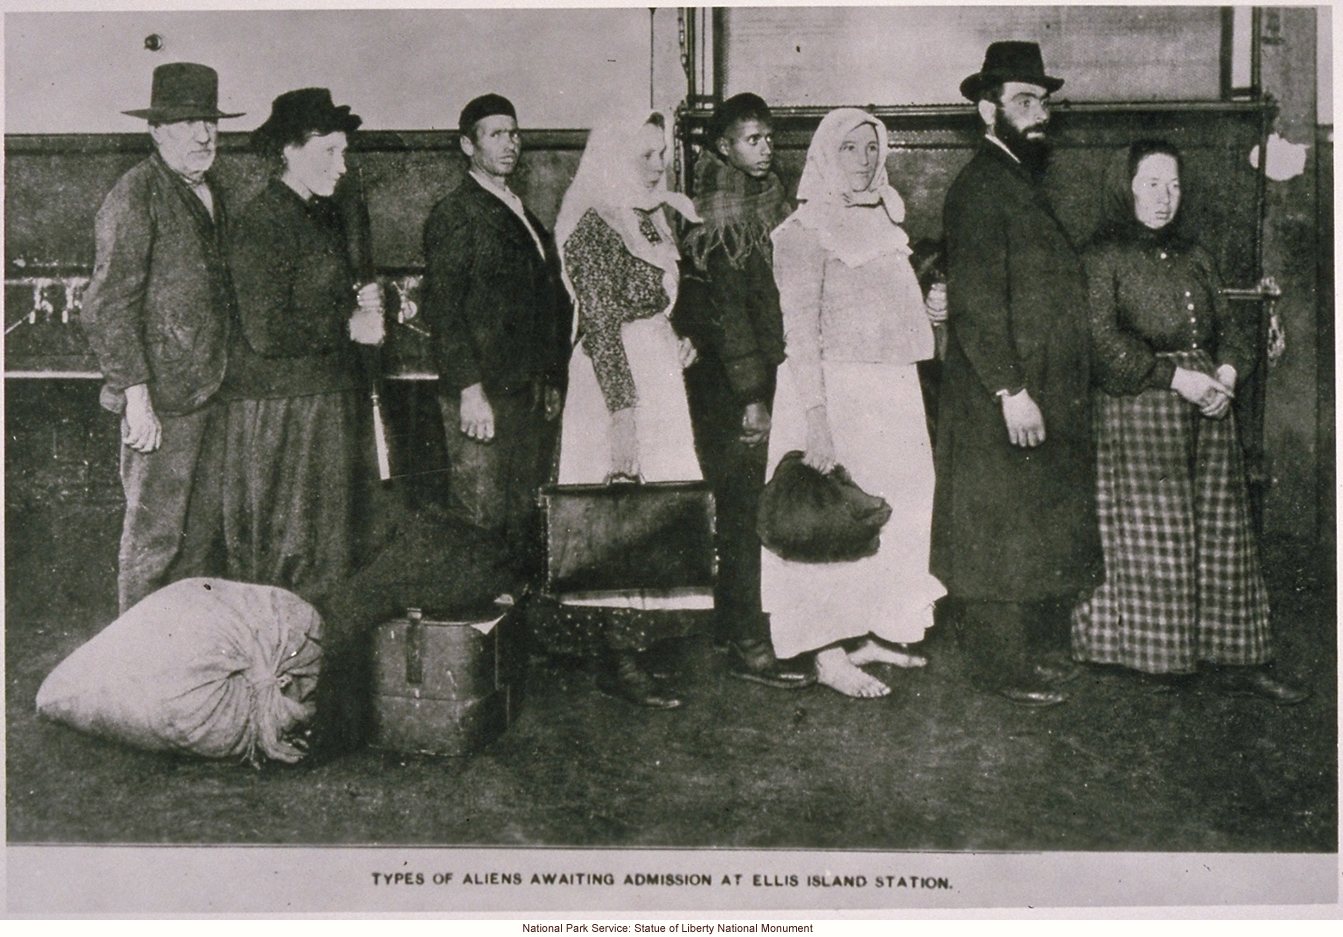 &quote;Types of Aliens Awaiting Admission at Ellis Island Station&quote;